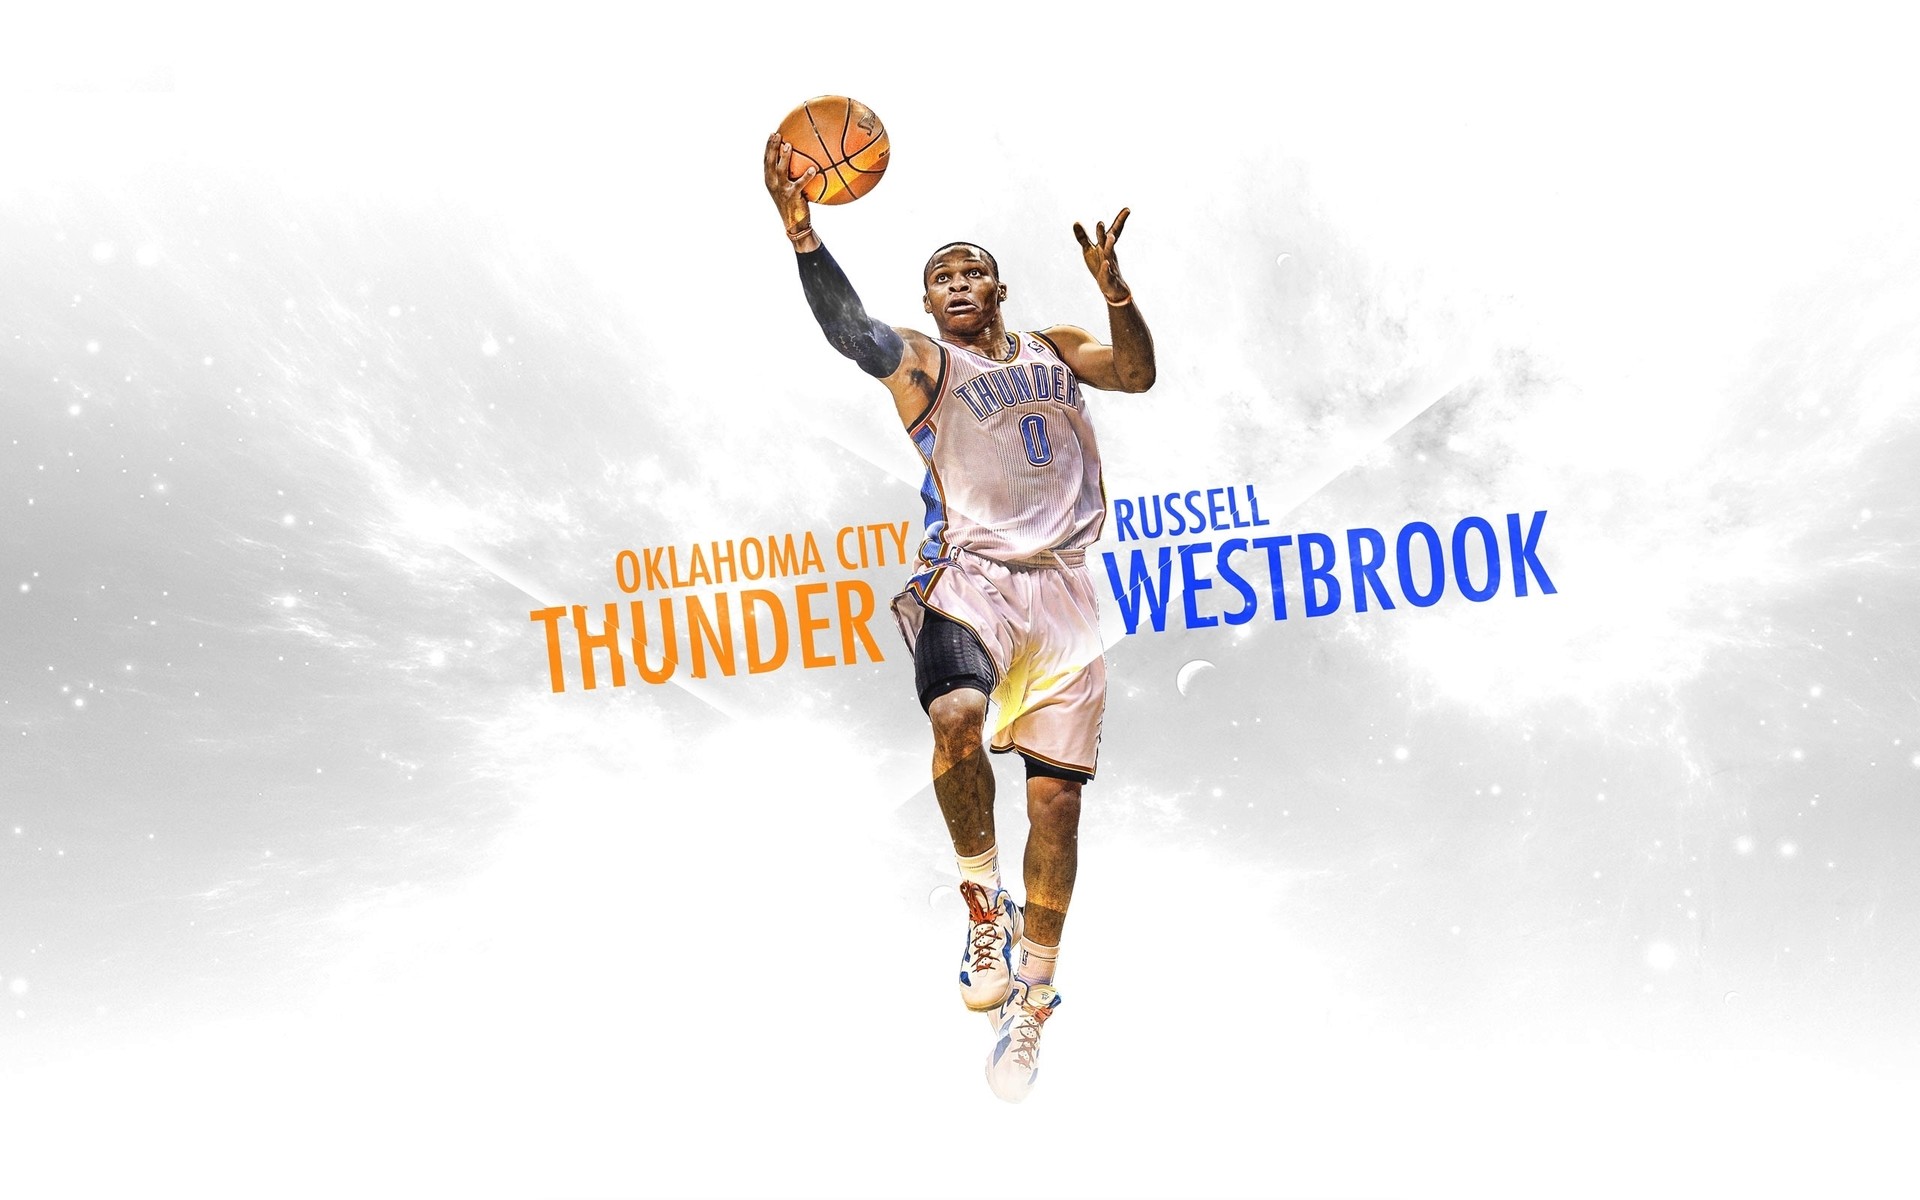 Russell westbrook okc – Google Search